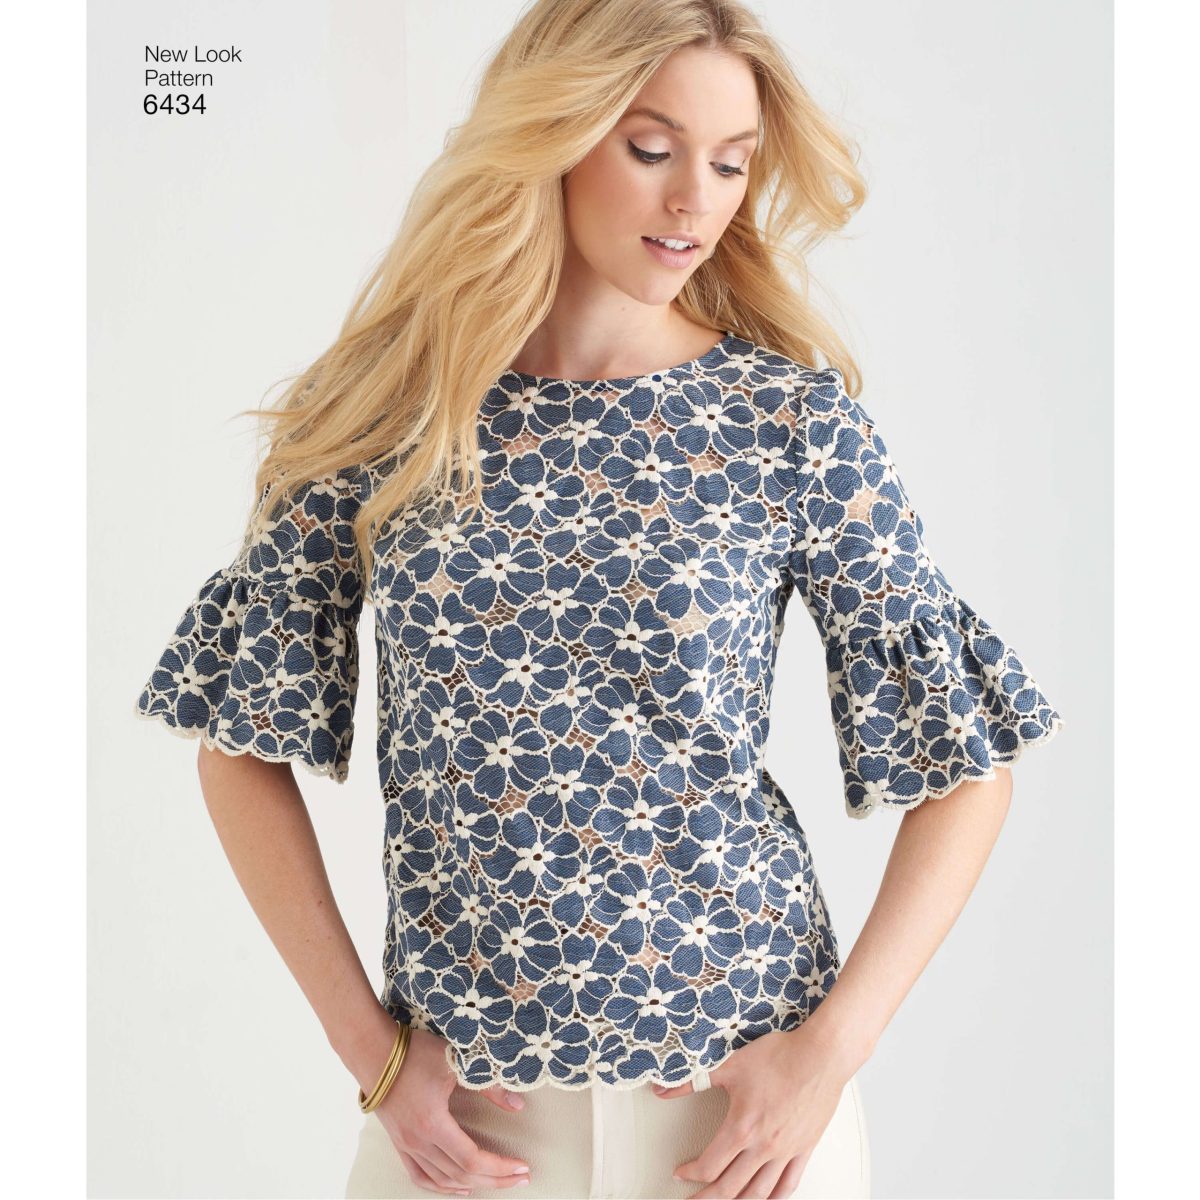 New Look Sewing Pattern N6434 Misses' Tops with Fabric Variations